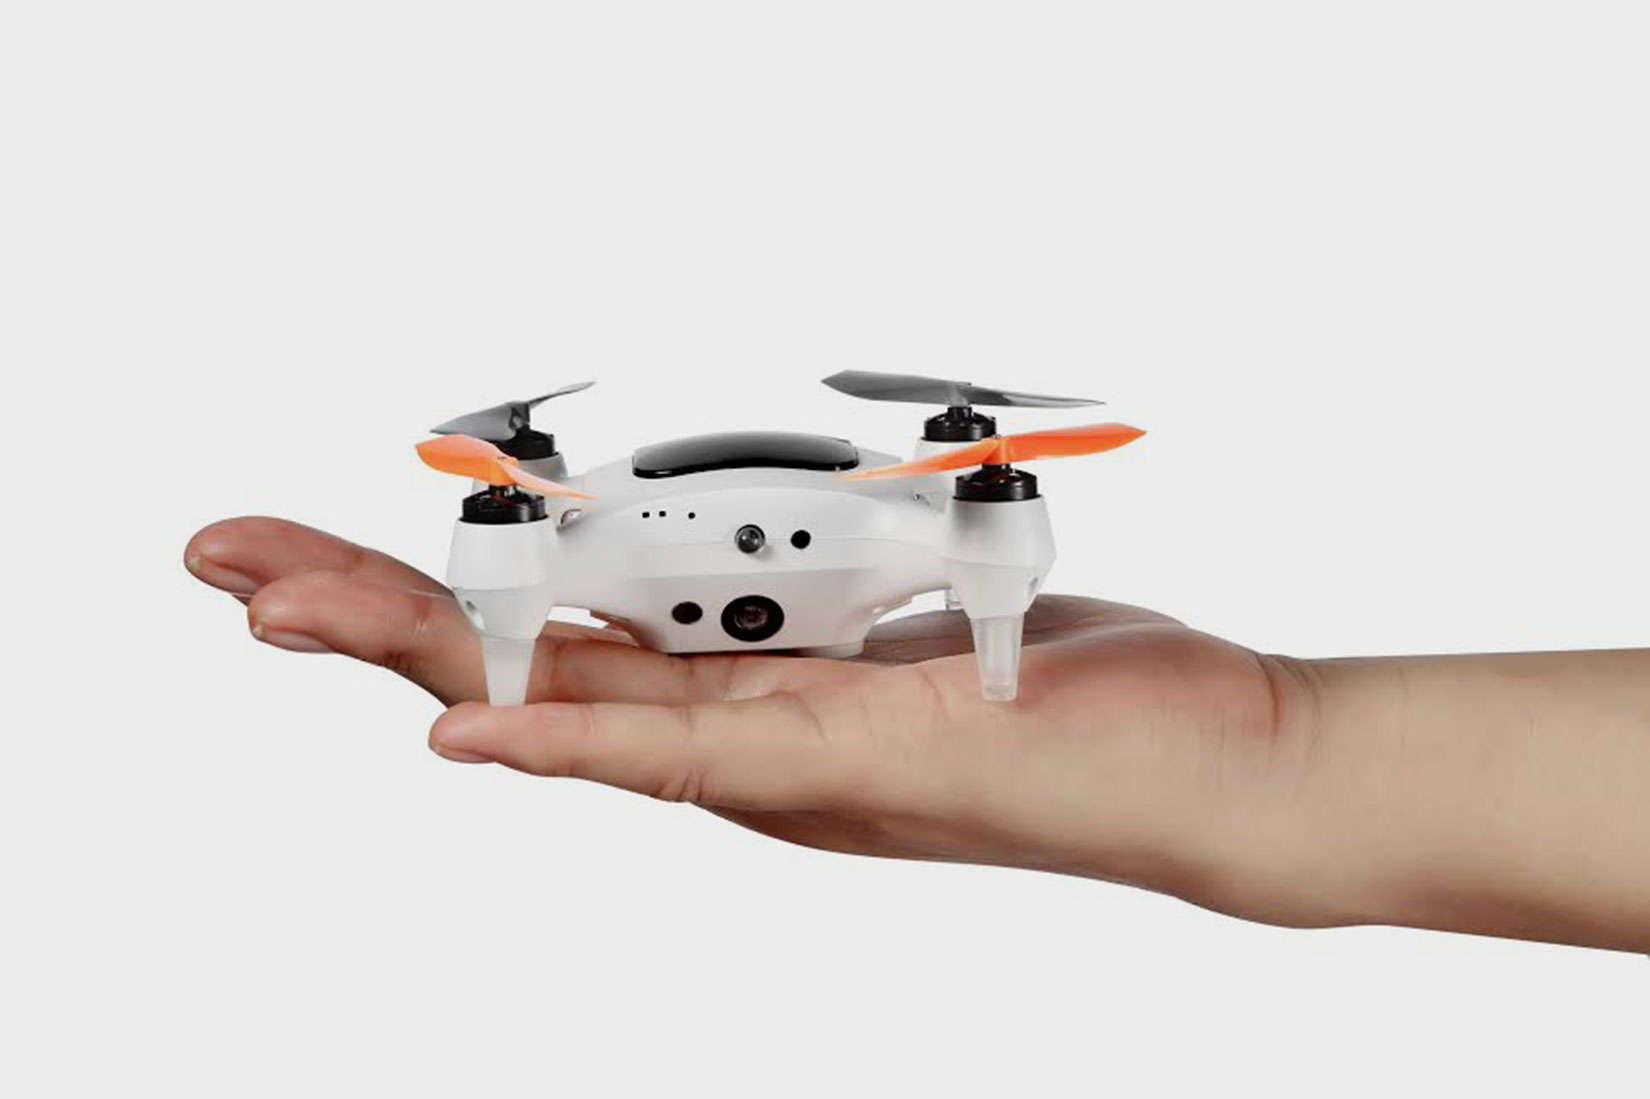 The little drone that carries a big camera.